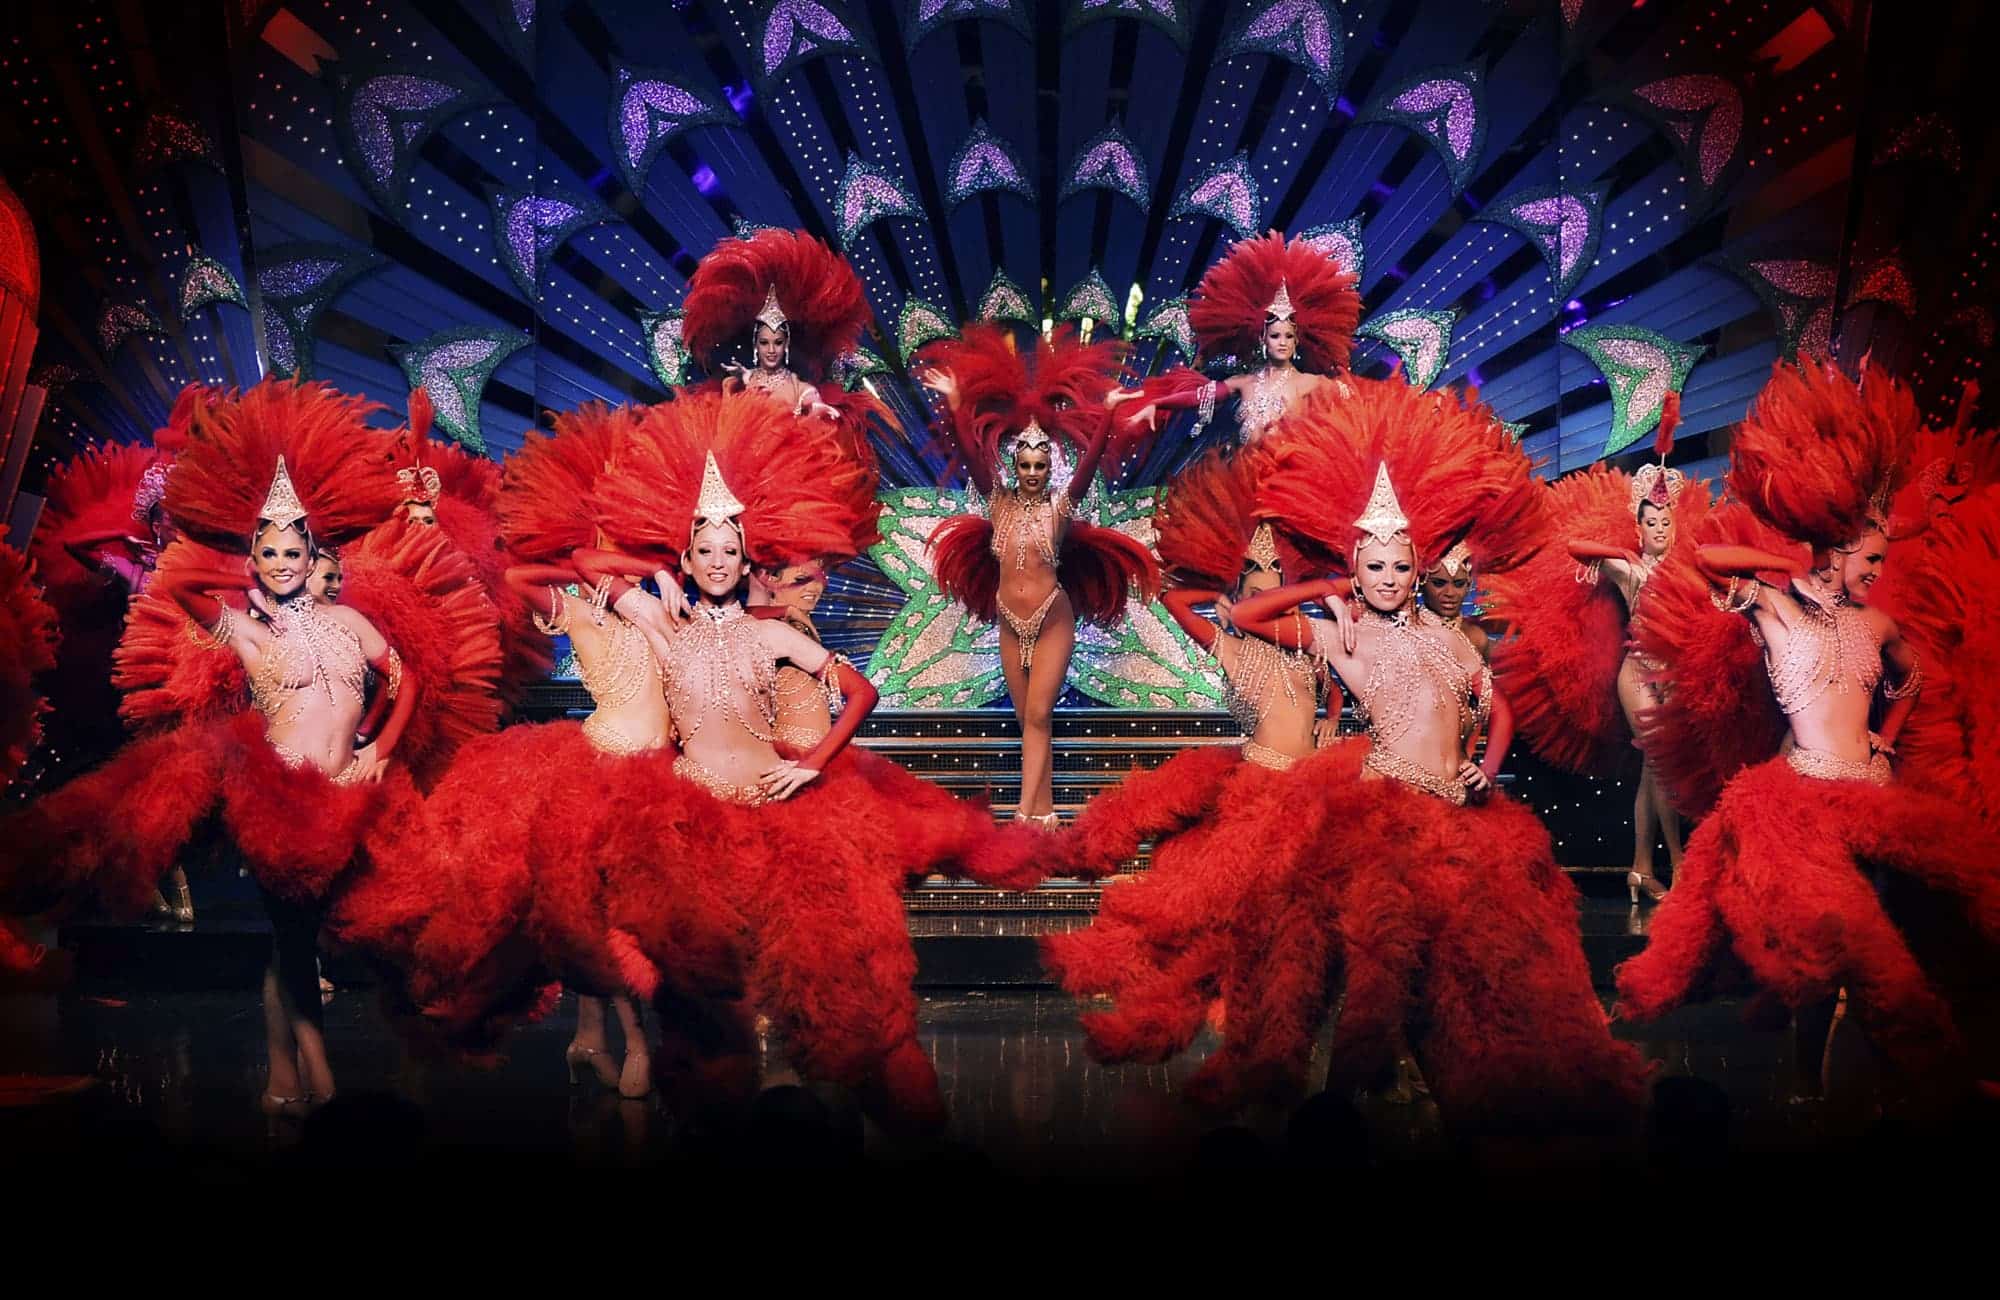 Moulin Rouge dancers on stage